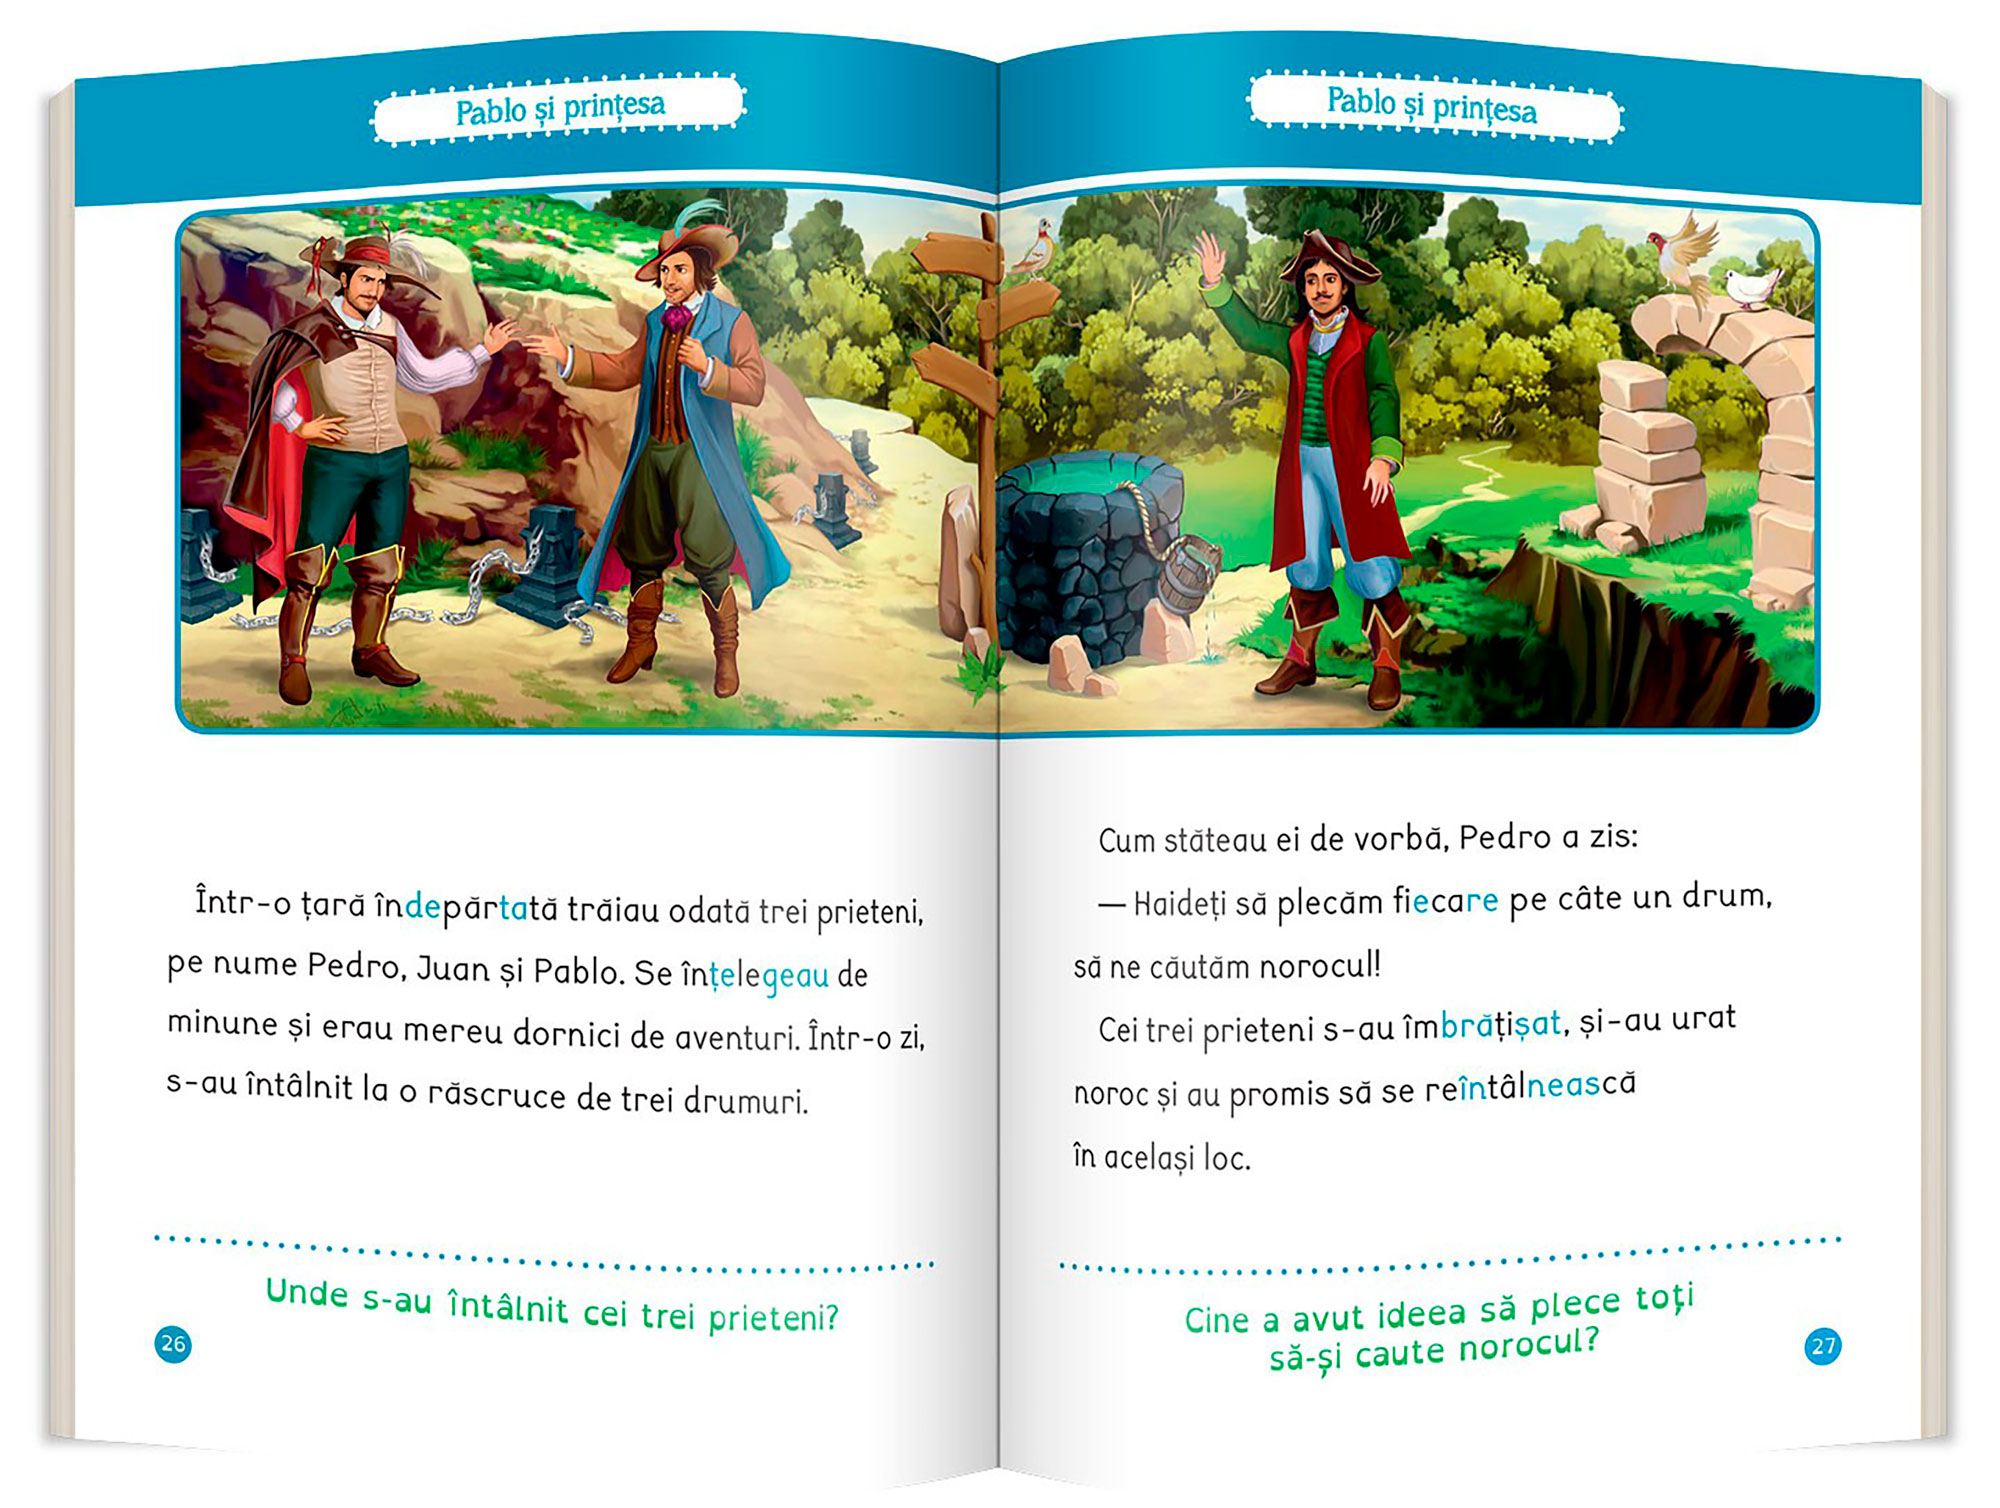 Double page spread of a children’s book in the series, shows a thick blue bar at the top going across the double page spread. Then a wide illustration of 3 men standing in a forest location, with direction signage signs. Below, shows large black body text, the dotted rules below, with text in green below